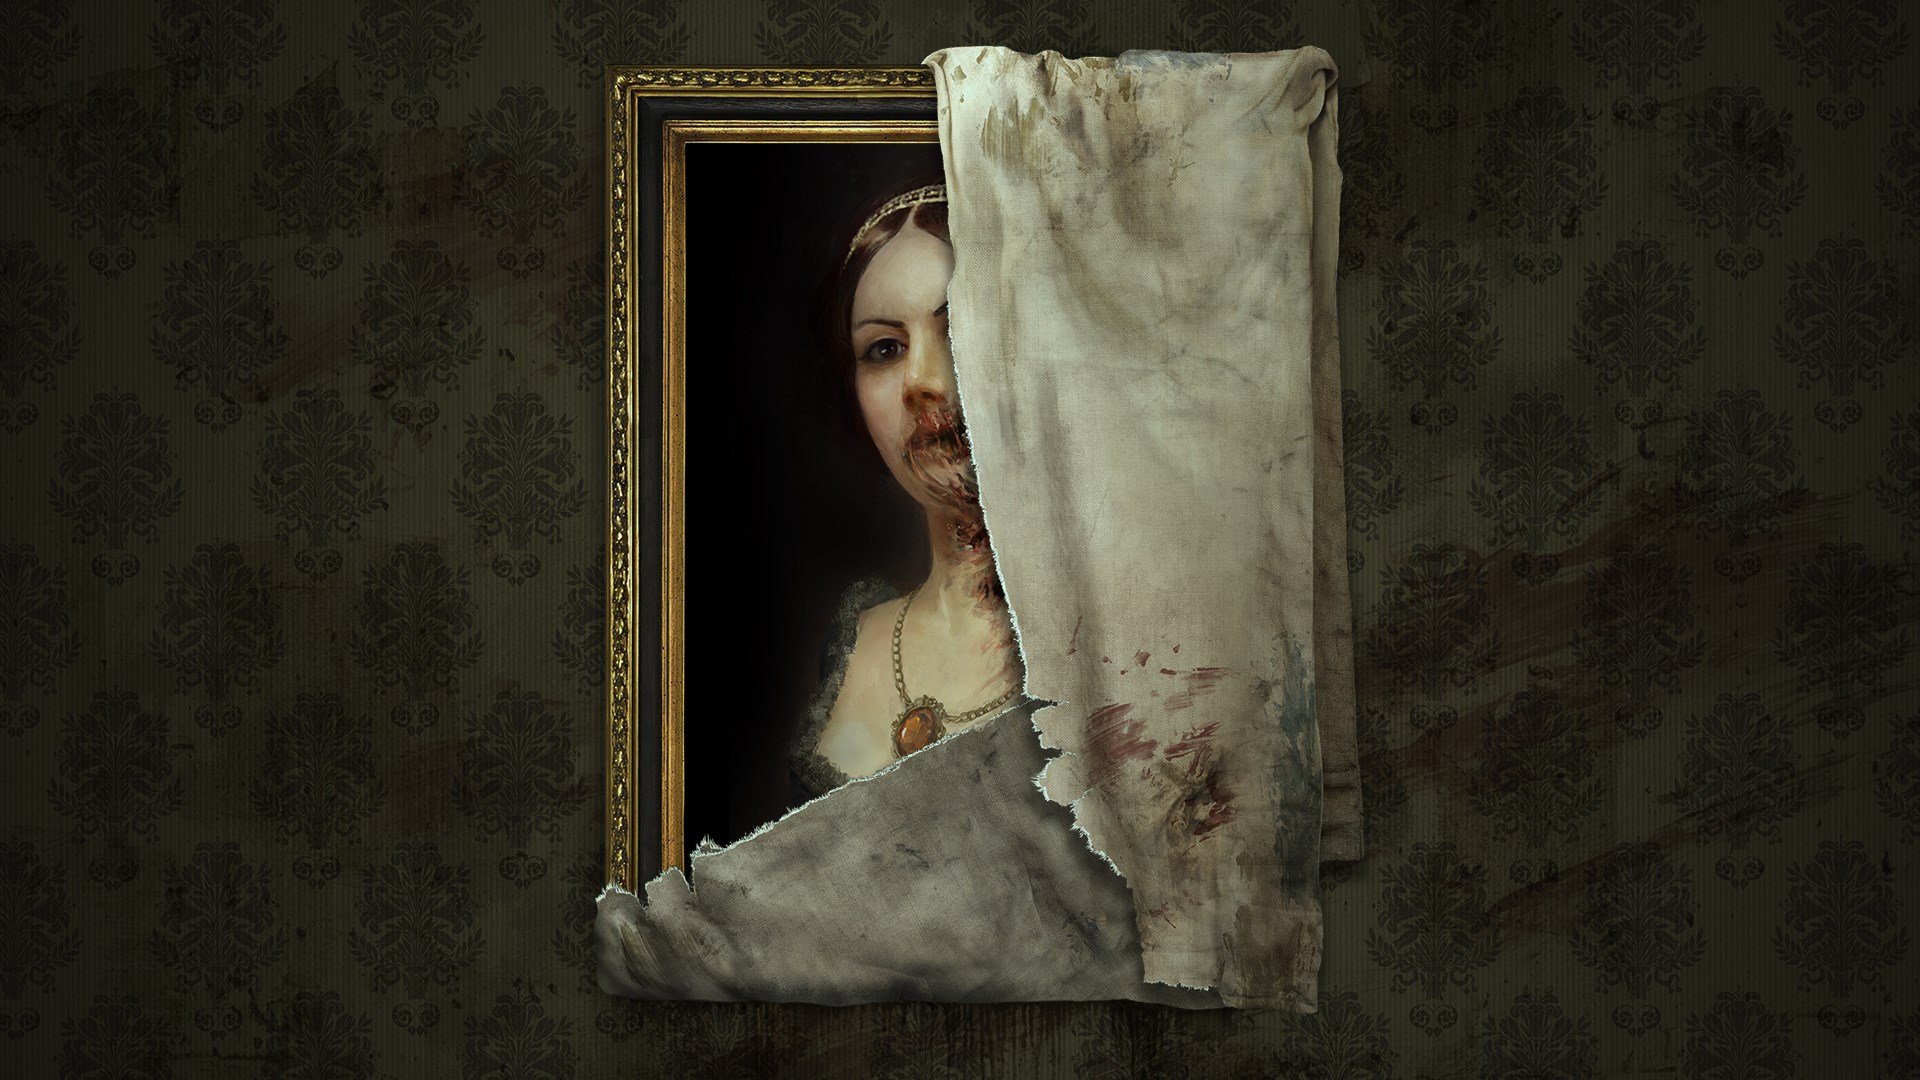 Layers of Fear Masterpiece Edition